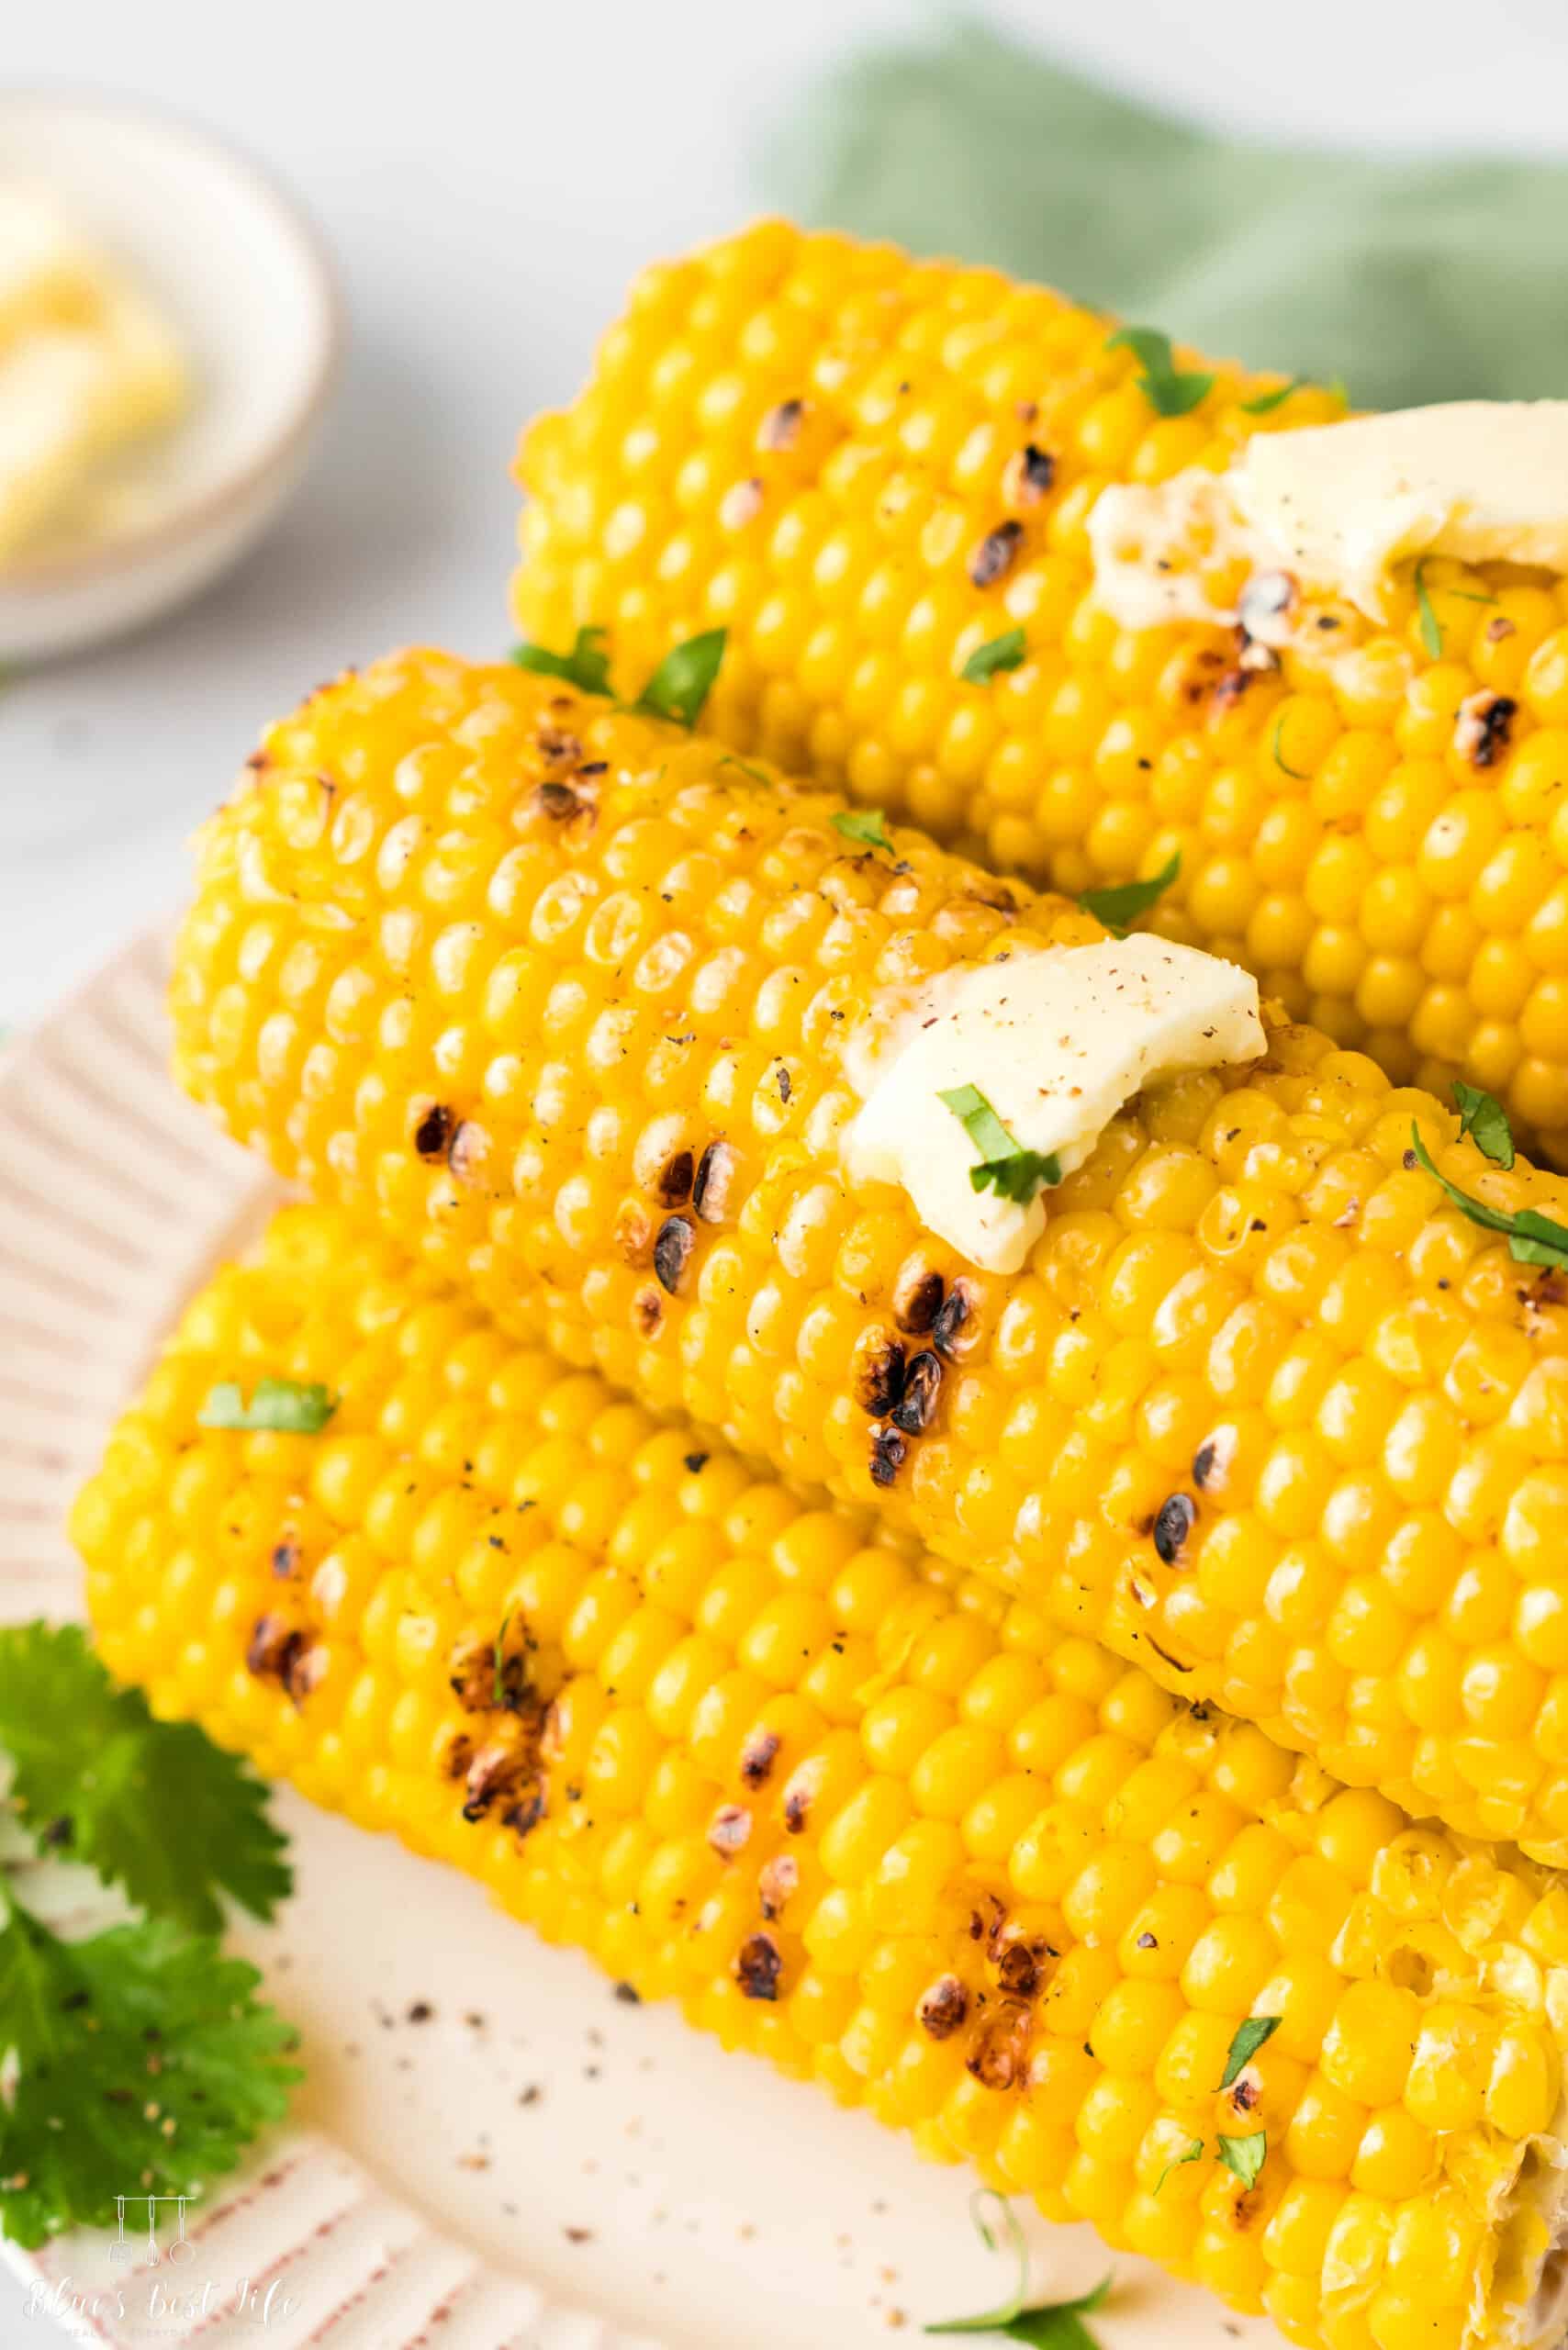 Grilled ears of corn on the cob with melted butter. 